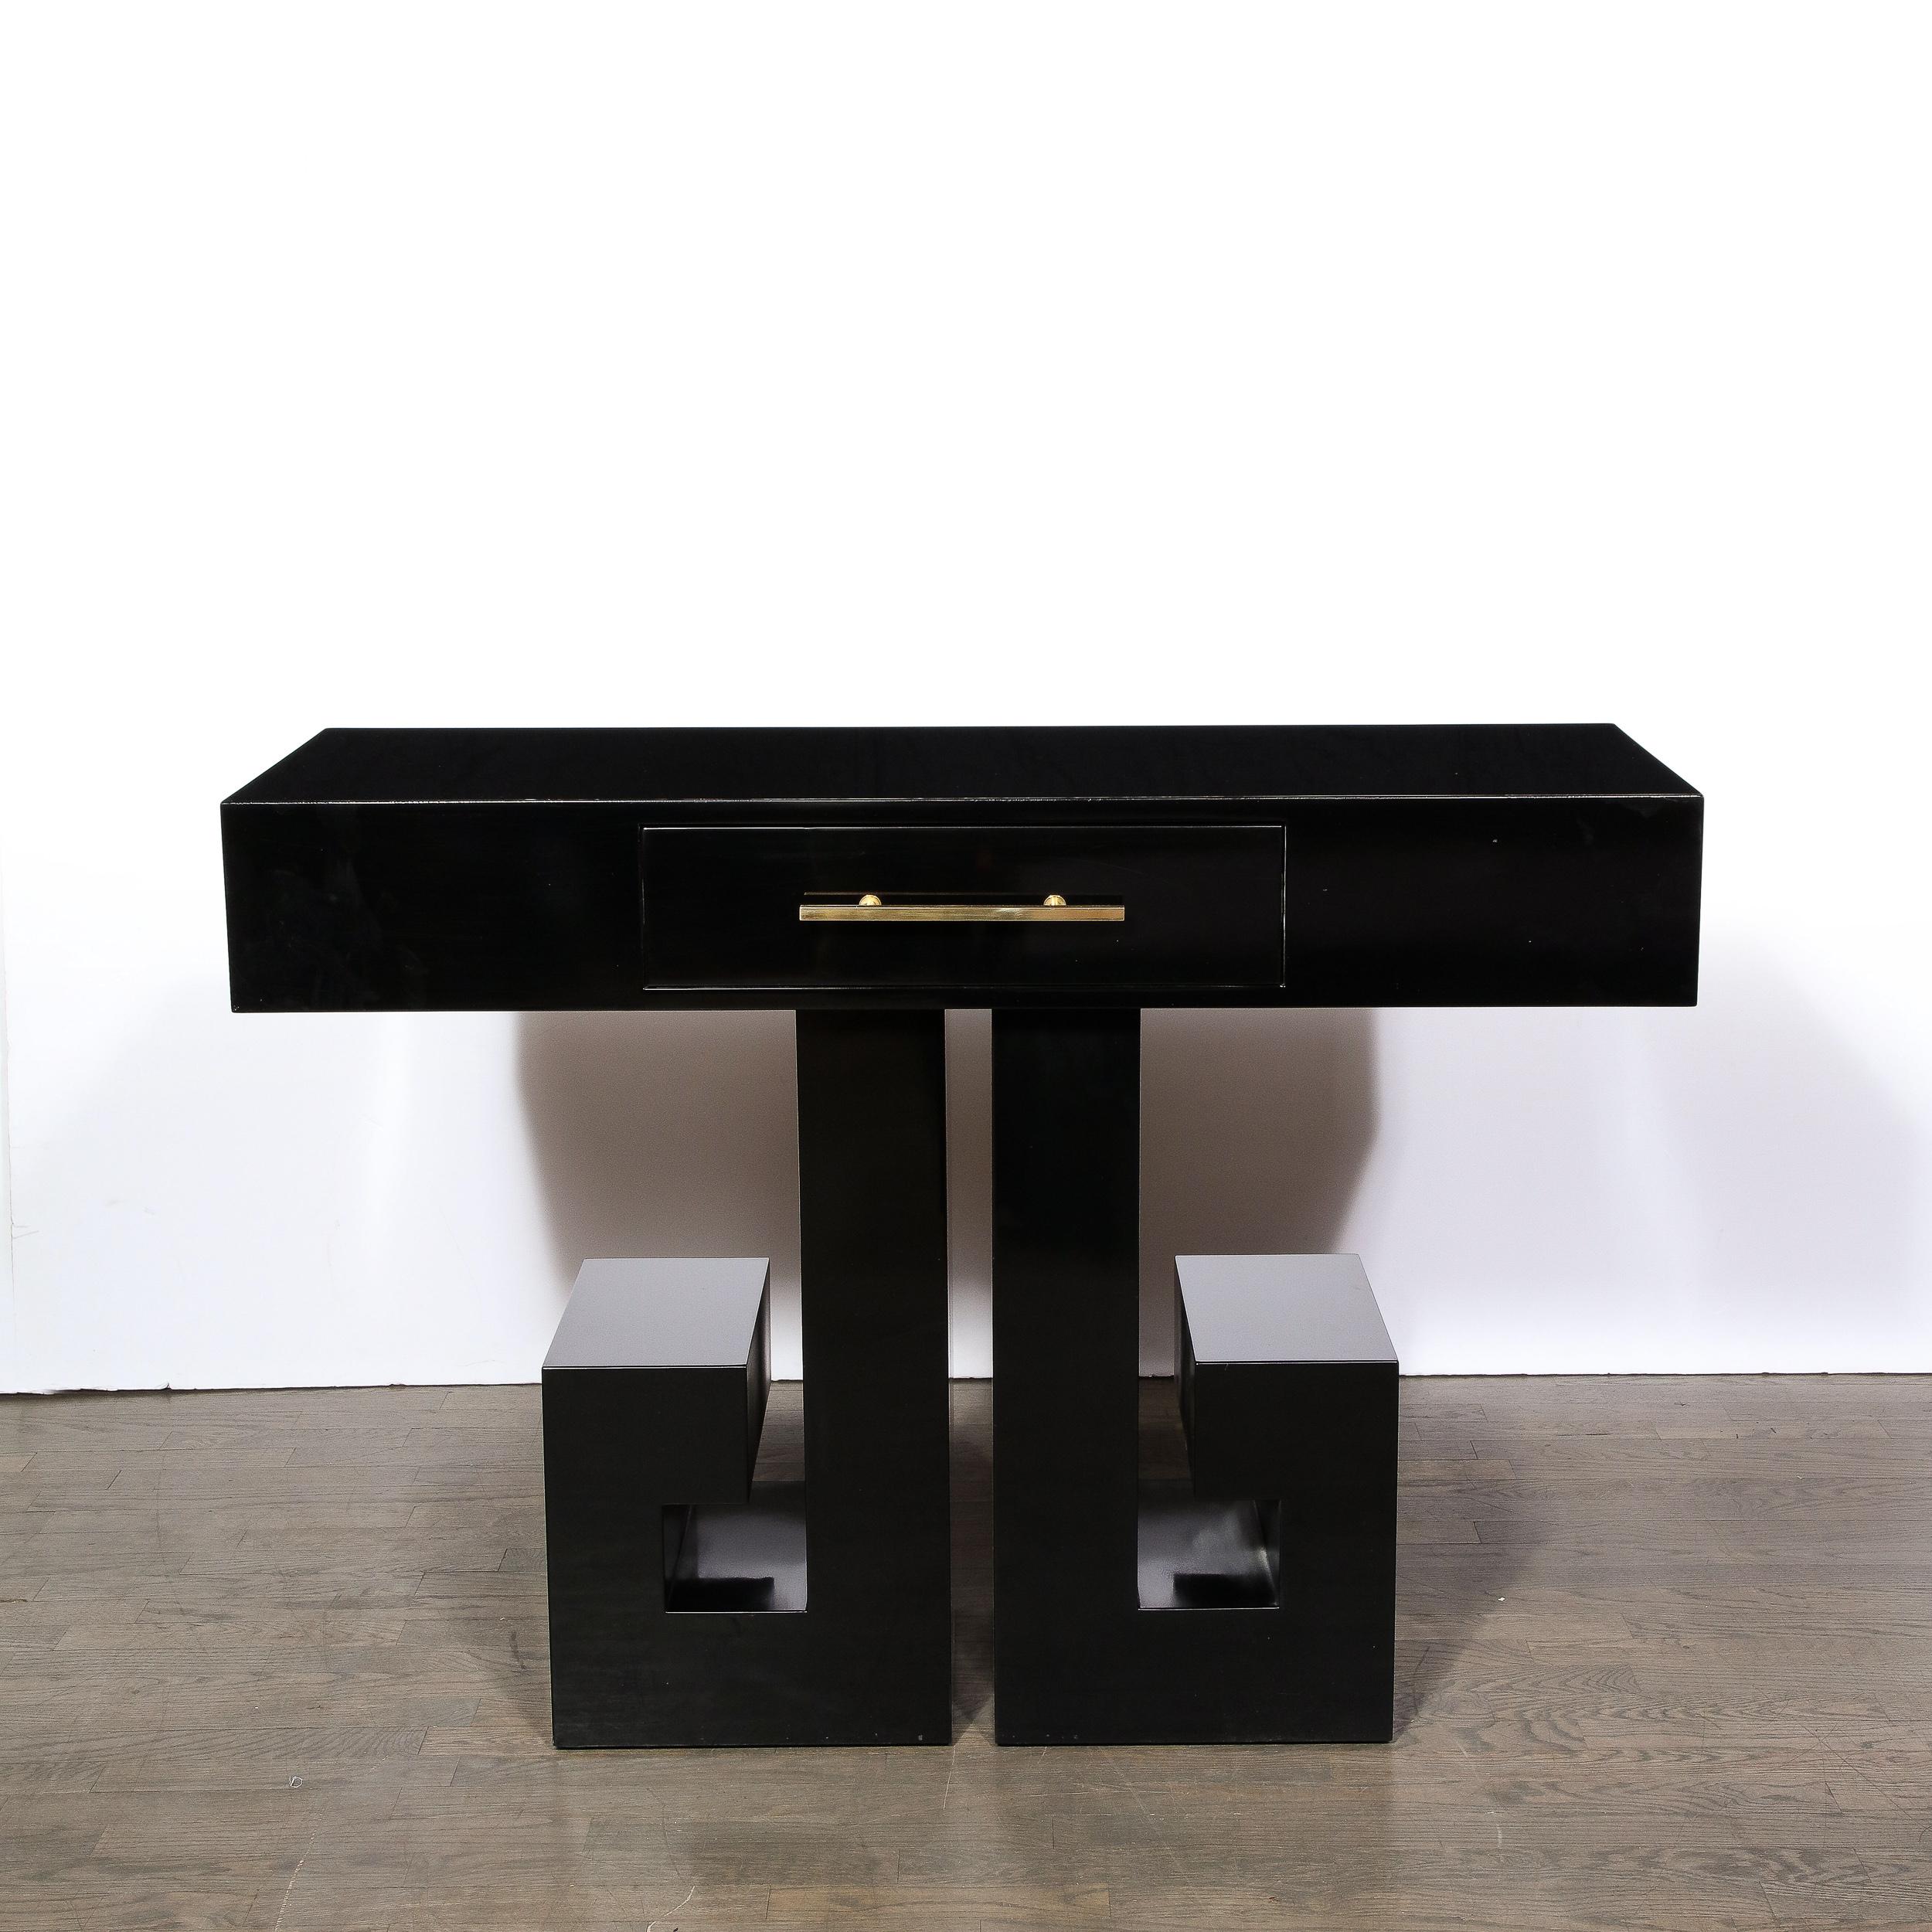 This elegant Art Deco style console table was realized in the United States during the 20th century. It features a sculptural base consisting of two stylized and abstracted Greek Key supports that wrap around and stop just short of completing an